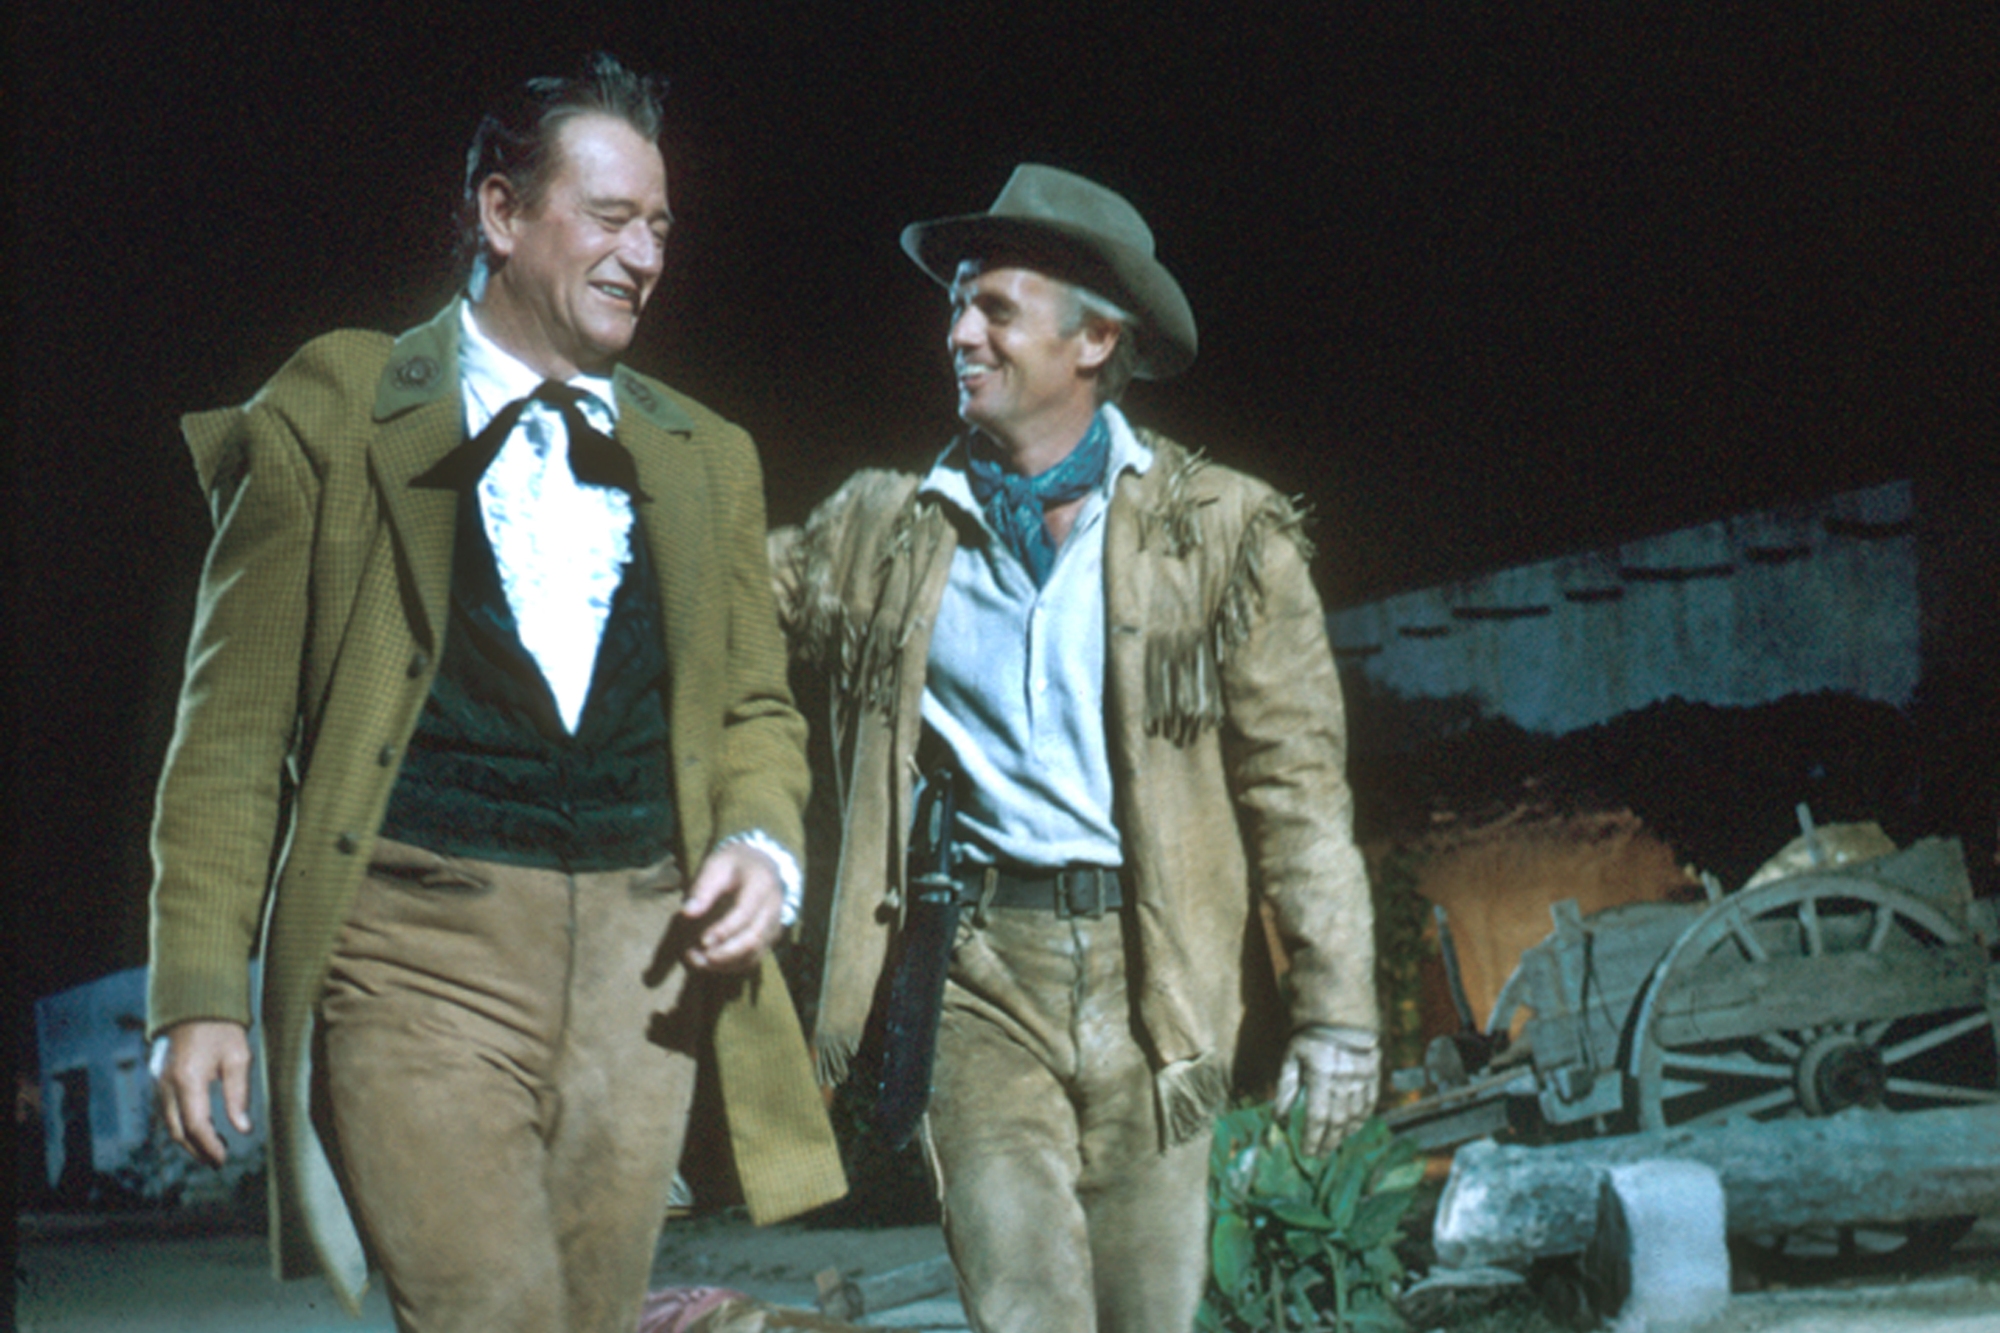 'The Alamo' John Wayne as Col. Davy Crockett and Richard Widmark as Col. Jim Bowie smiling as they walk alongside one another wearing Western clothes